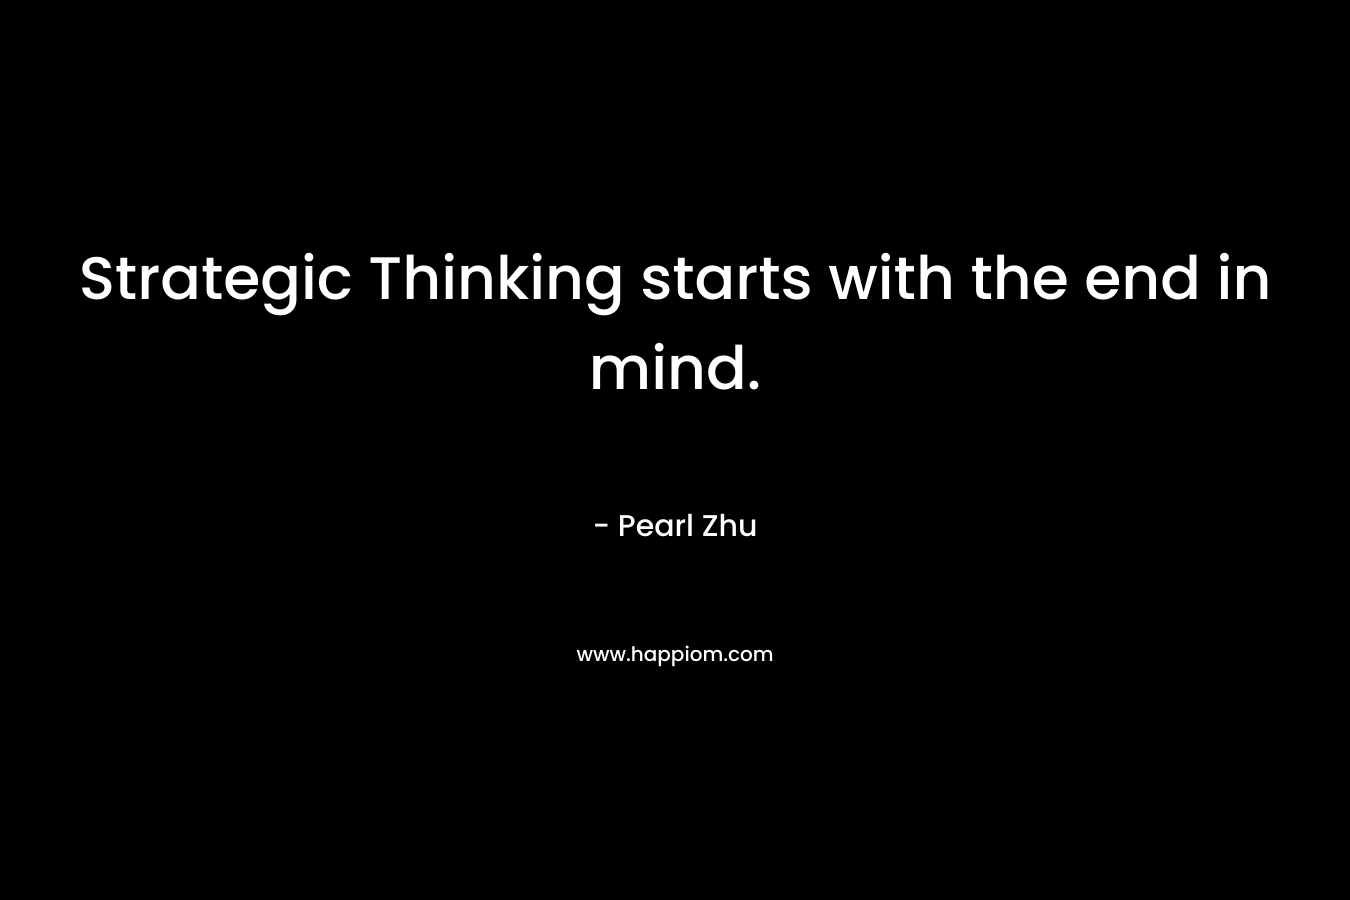 Strategic Thinking starts with the end in mind.